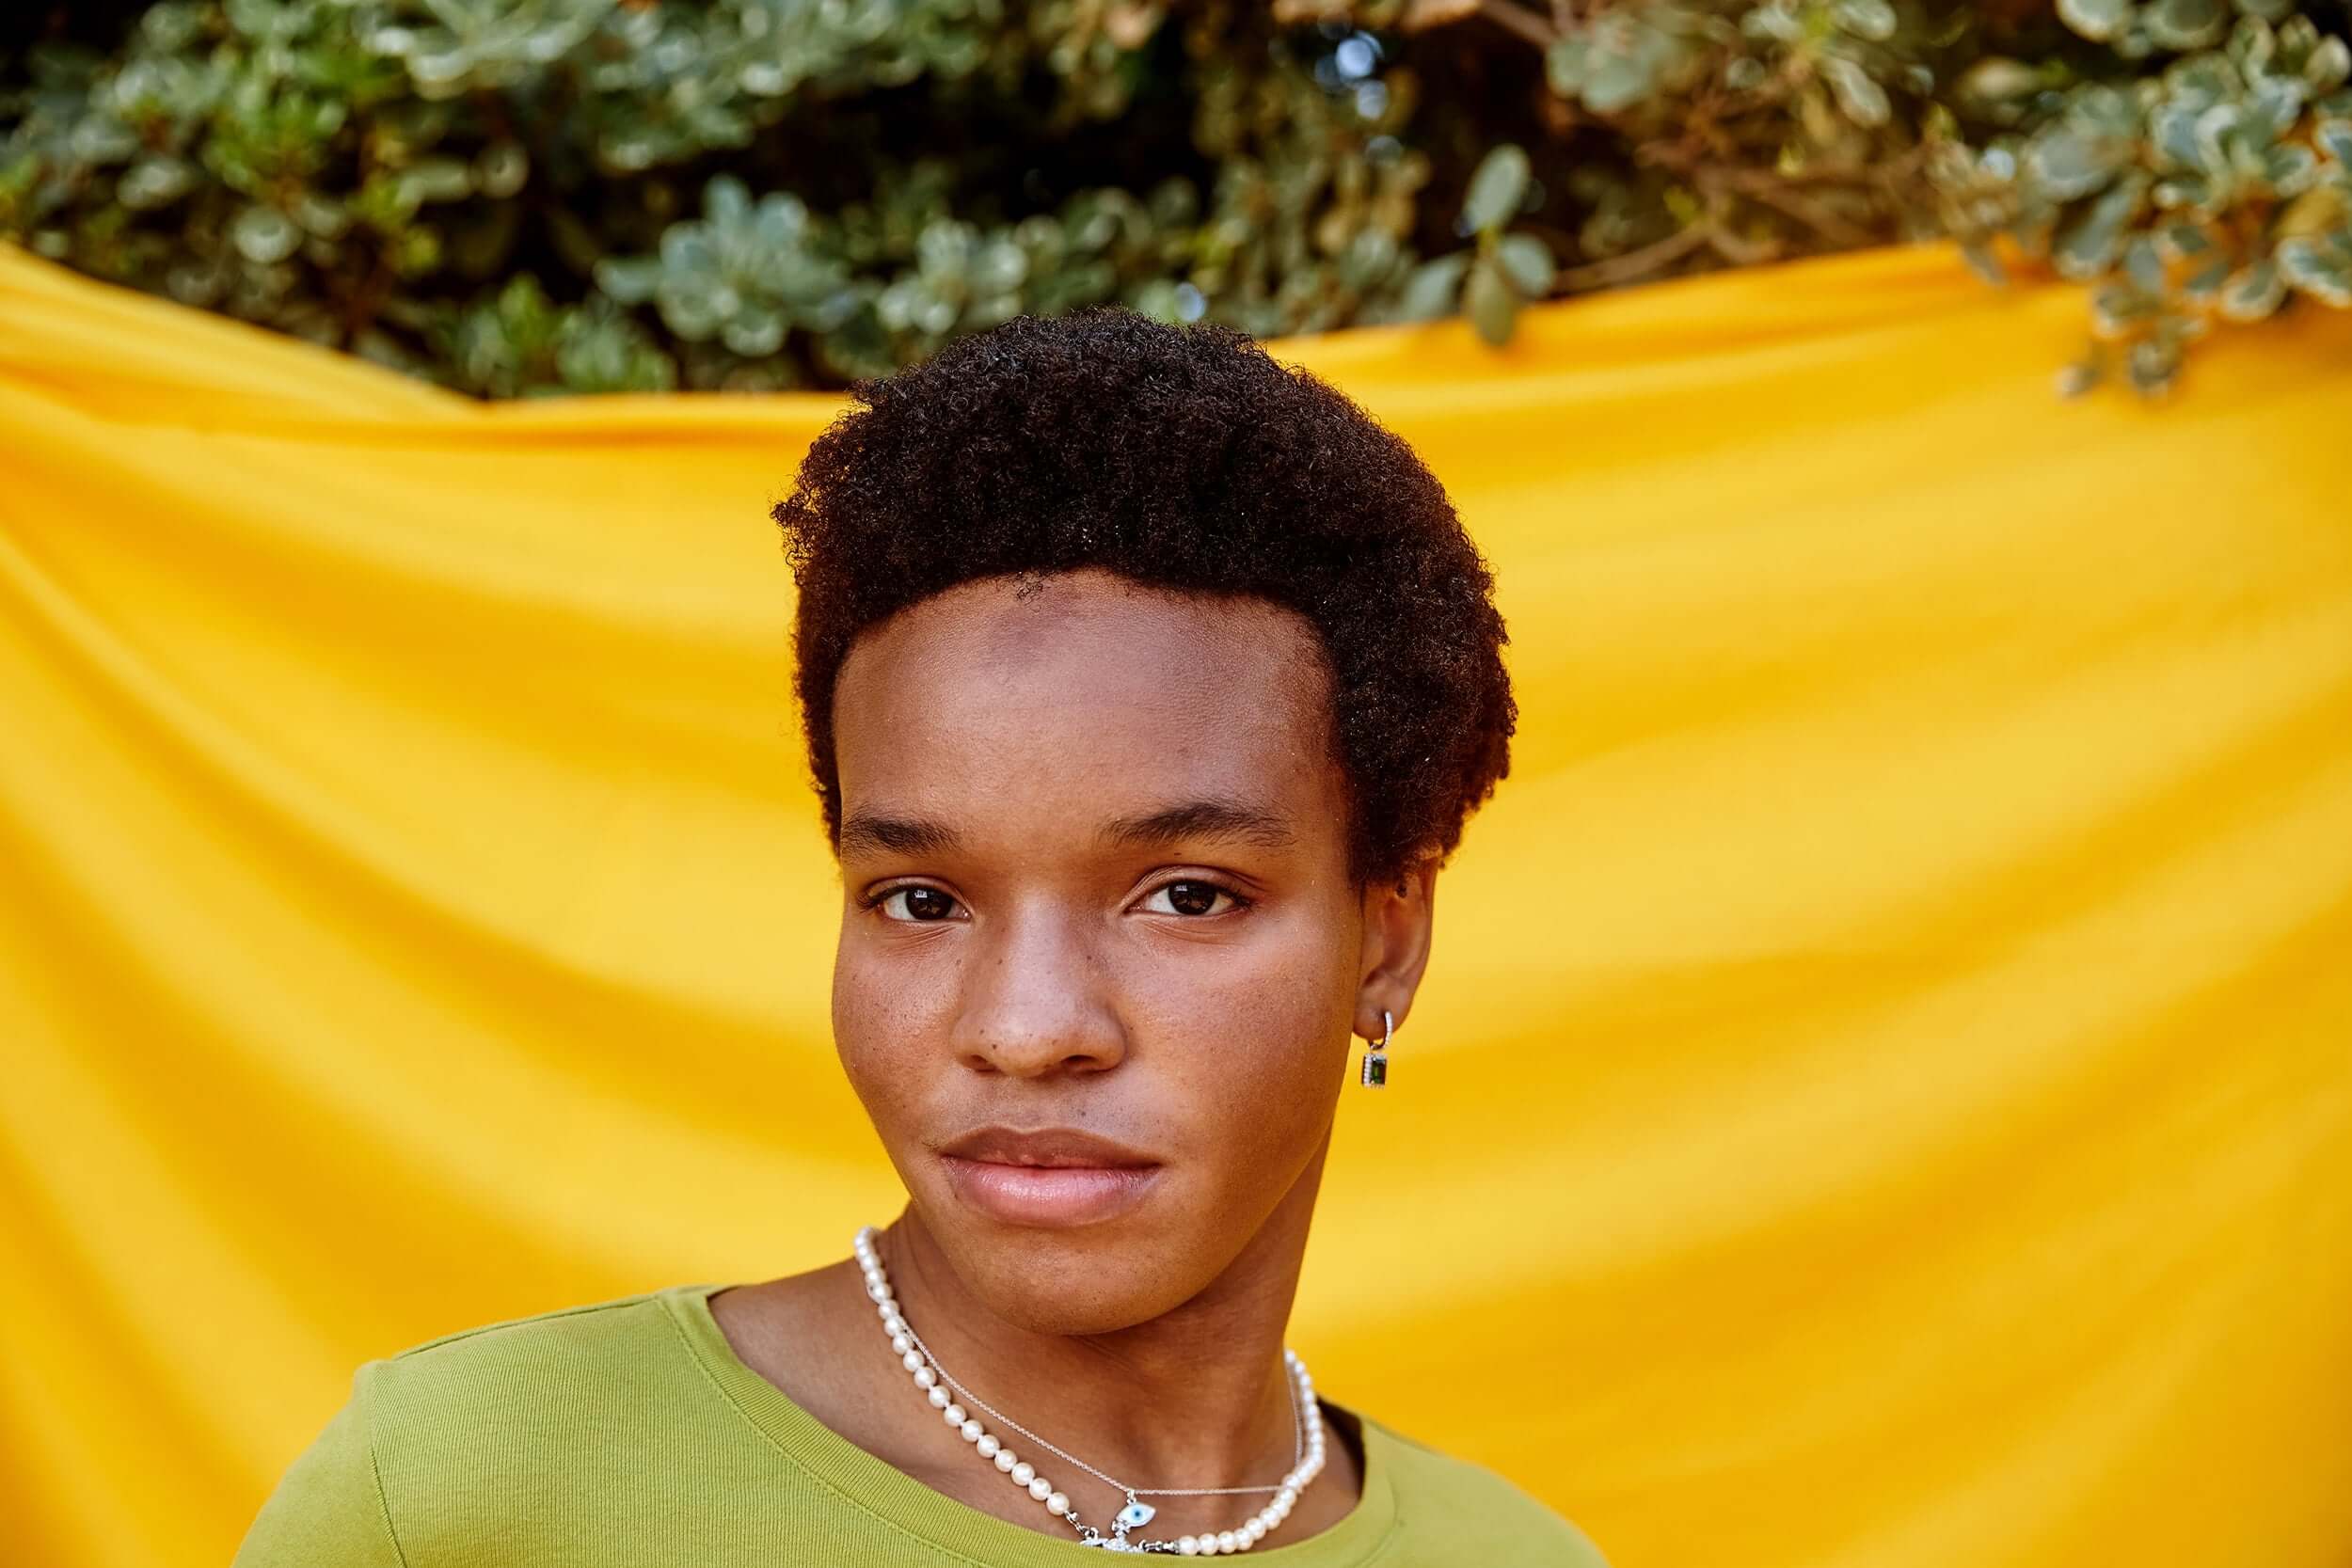 Close-up of an LGBTQ young person in a green shirt, standing in front of a yellow backdrop